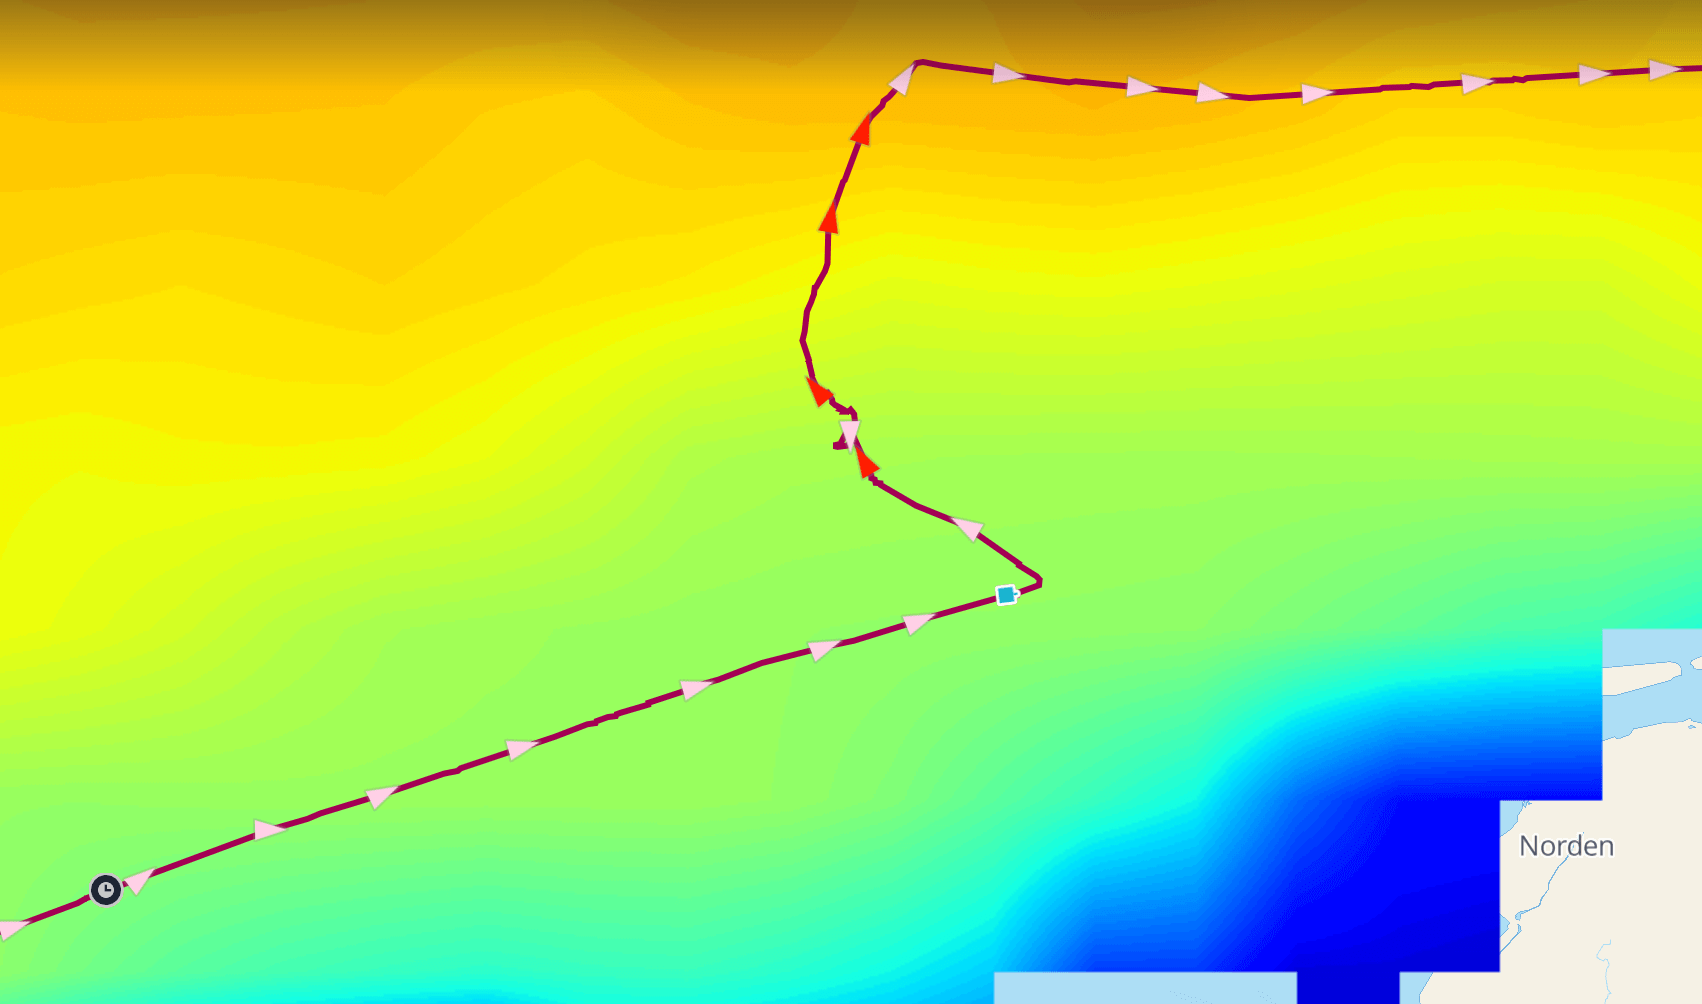 Screenshot from Windward system of color-coded wave heights and vessel path